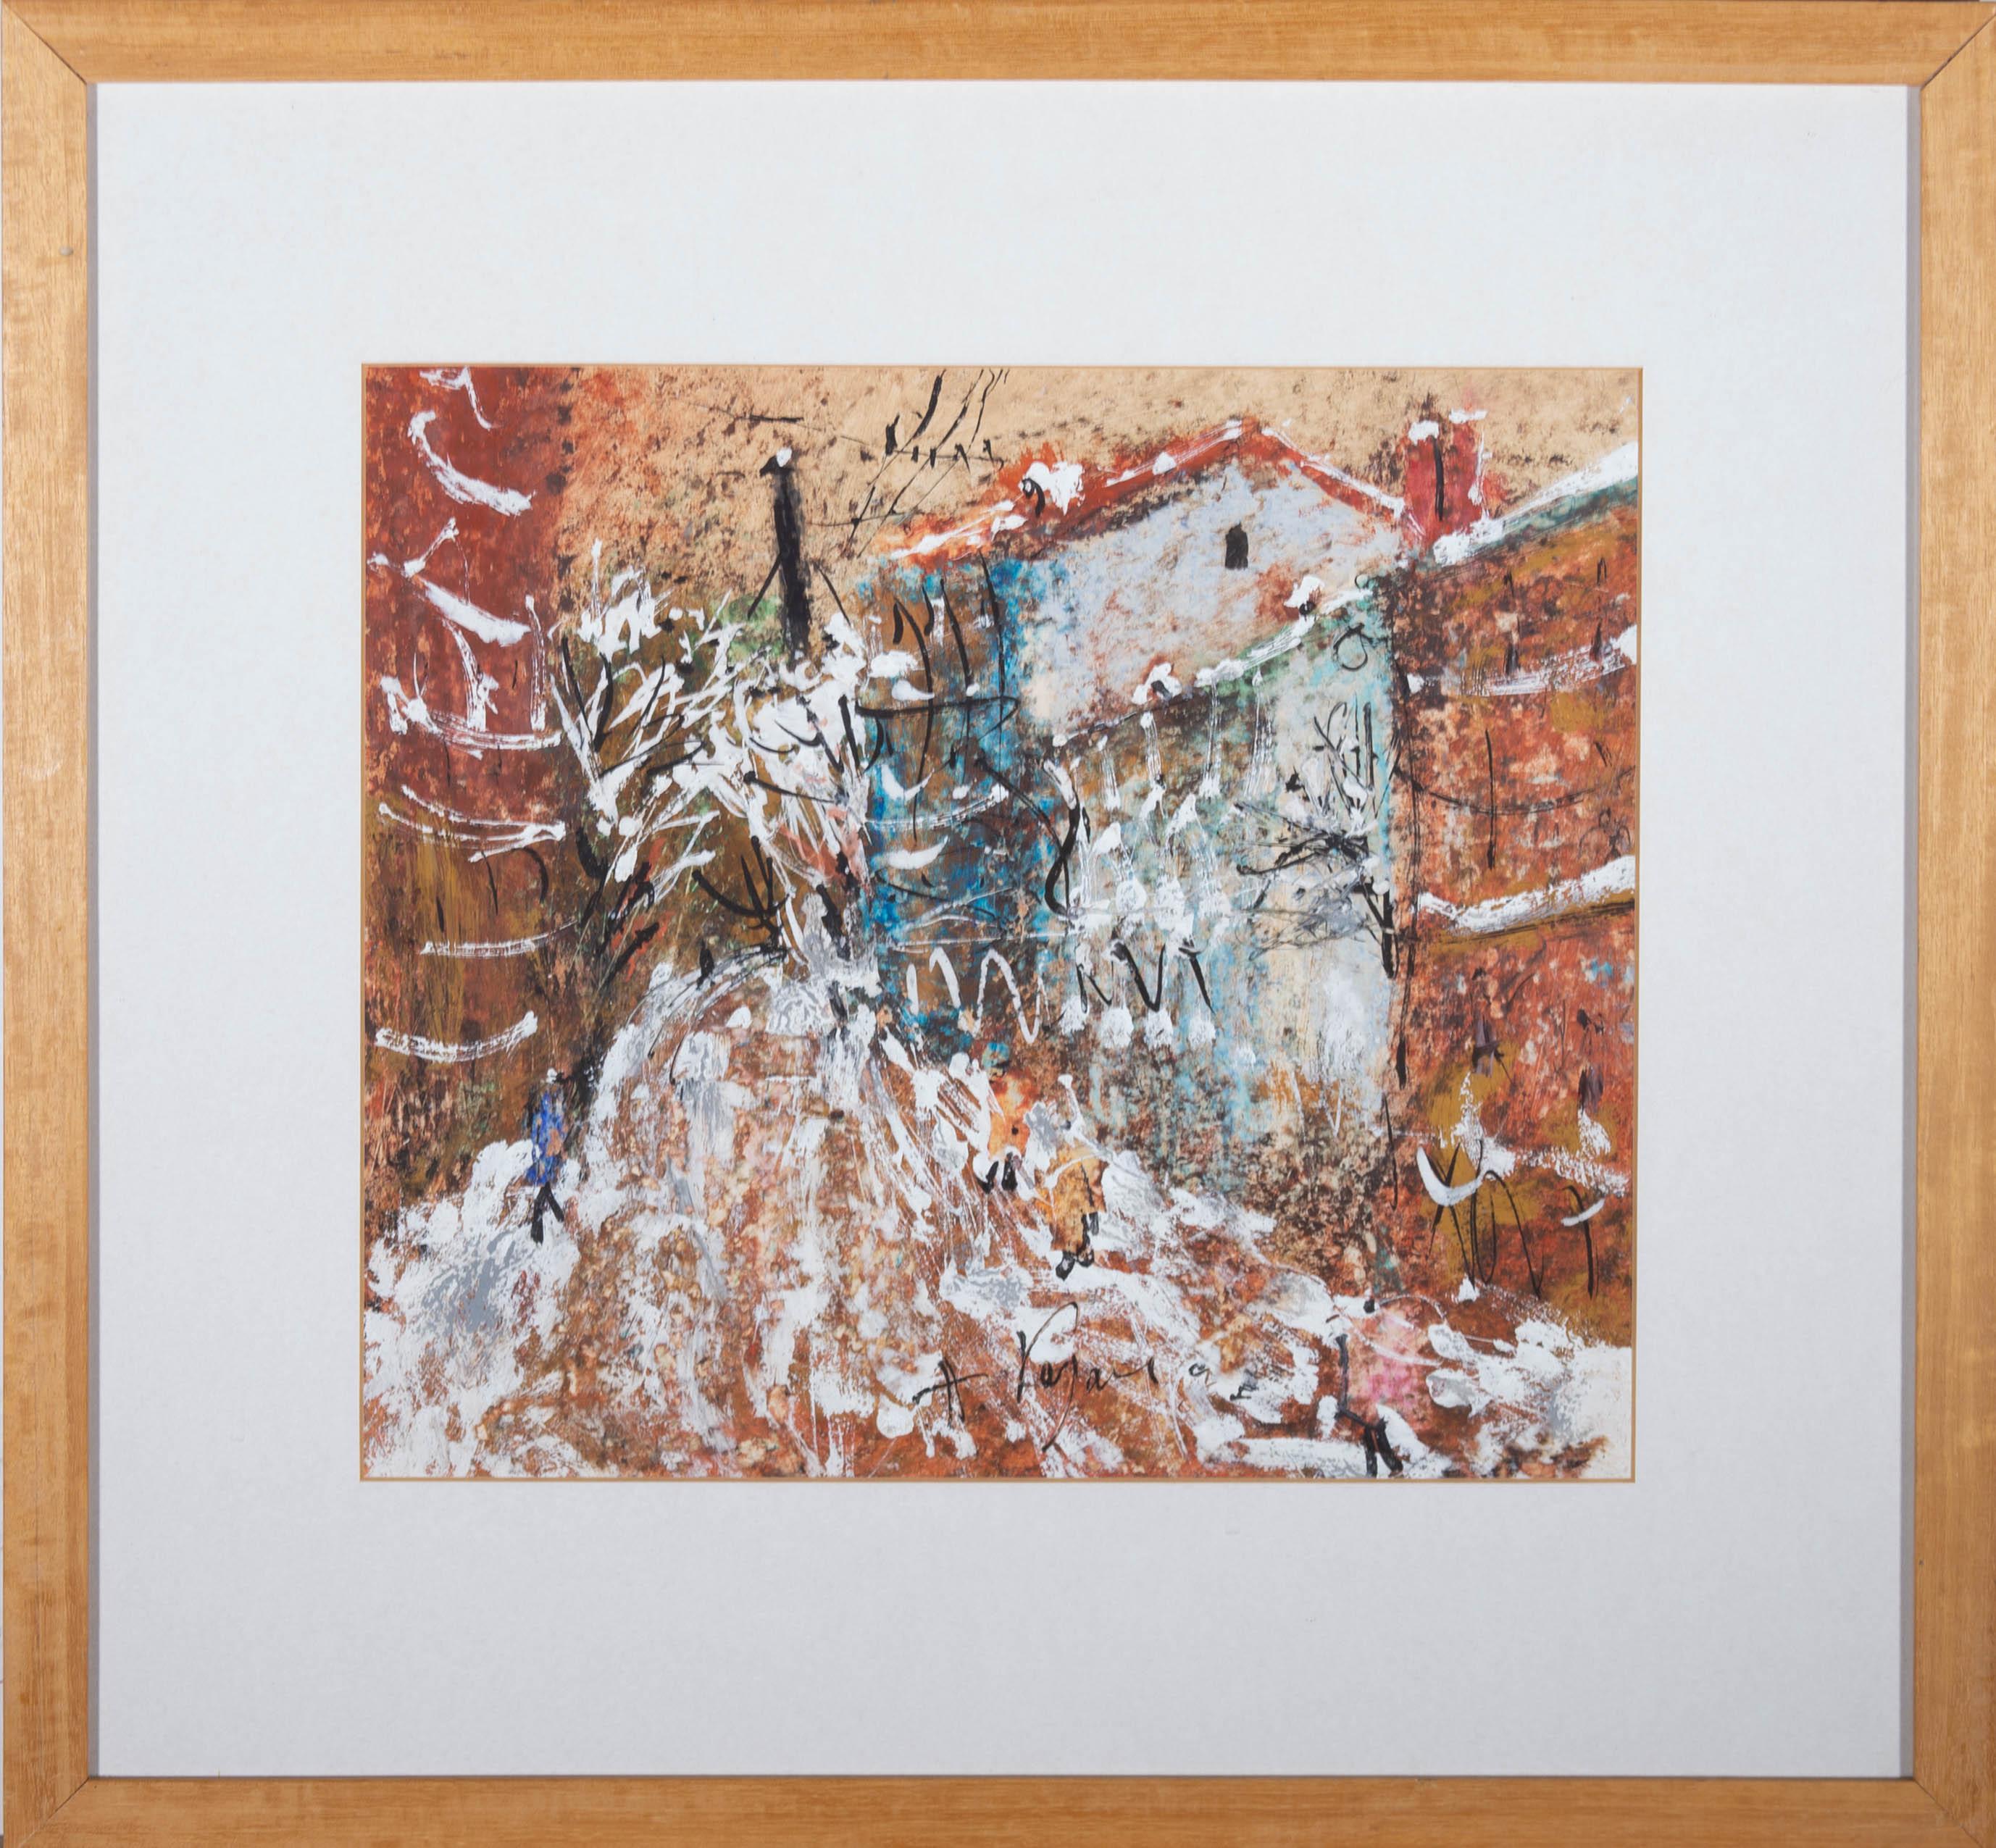 An acrylic, gouache and pen and ink painting by Russian artist Aleksej Kazachenko, depicting a street scene. Signed to the lower margin. The artist's name and title are inscribed on the reverse. Presented in a card mount and in a light wooden frame.